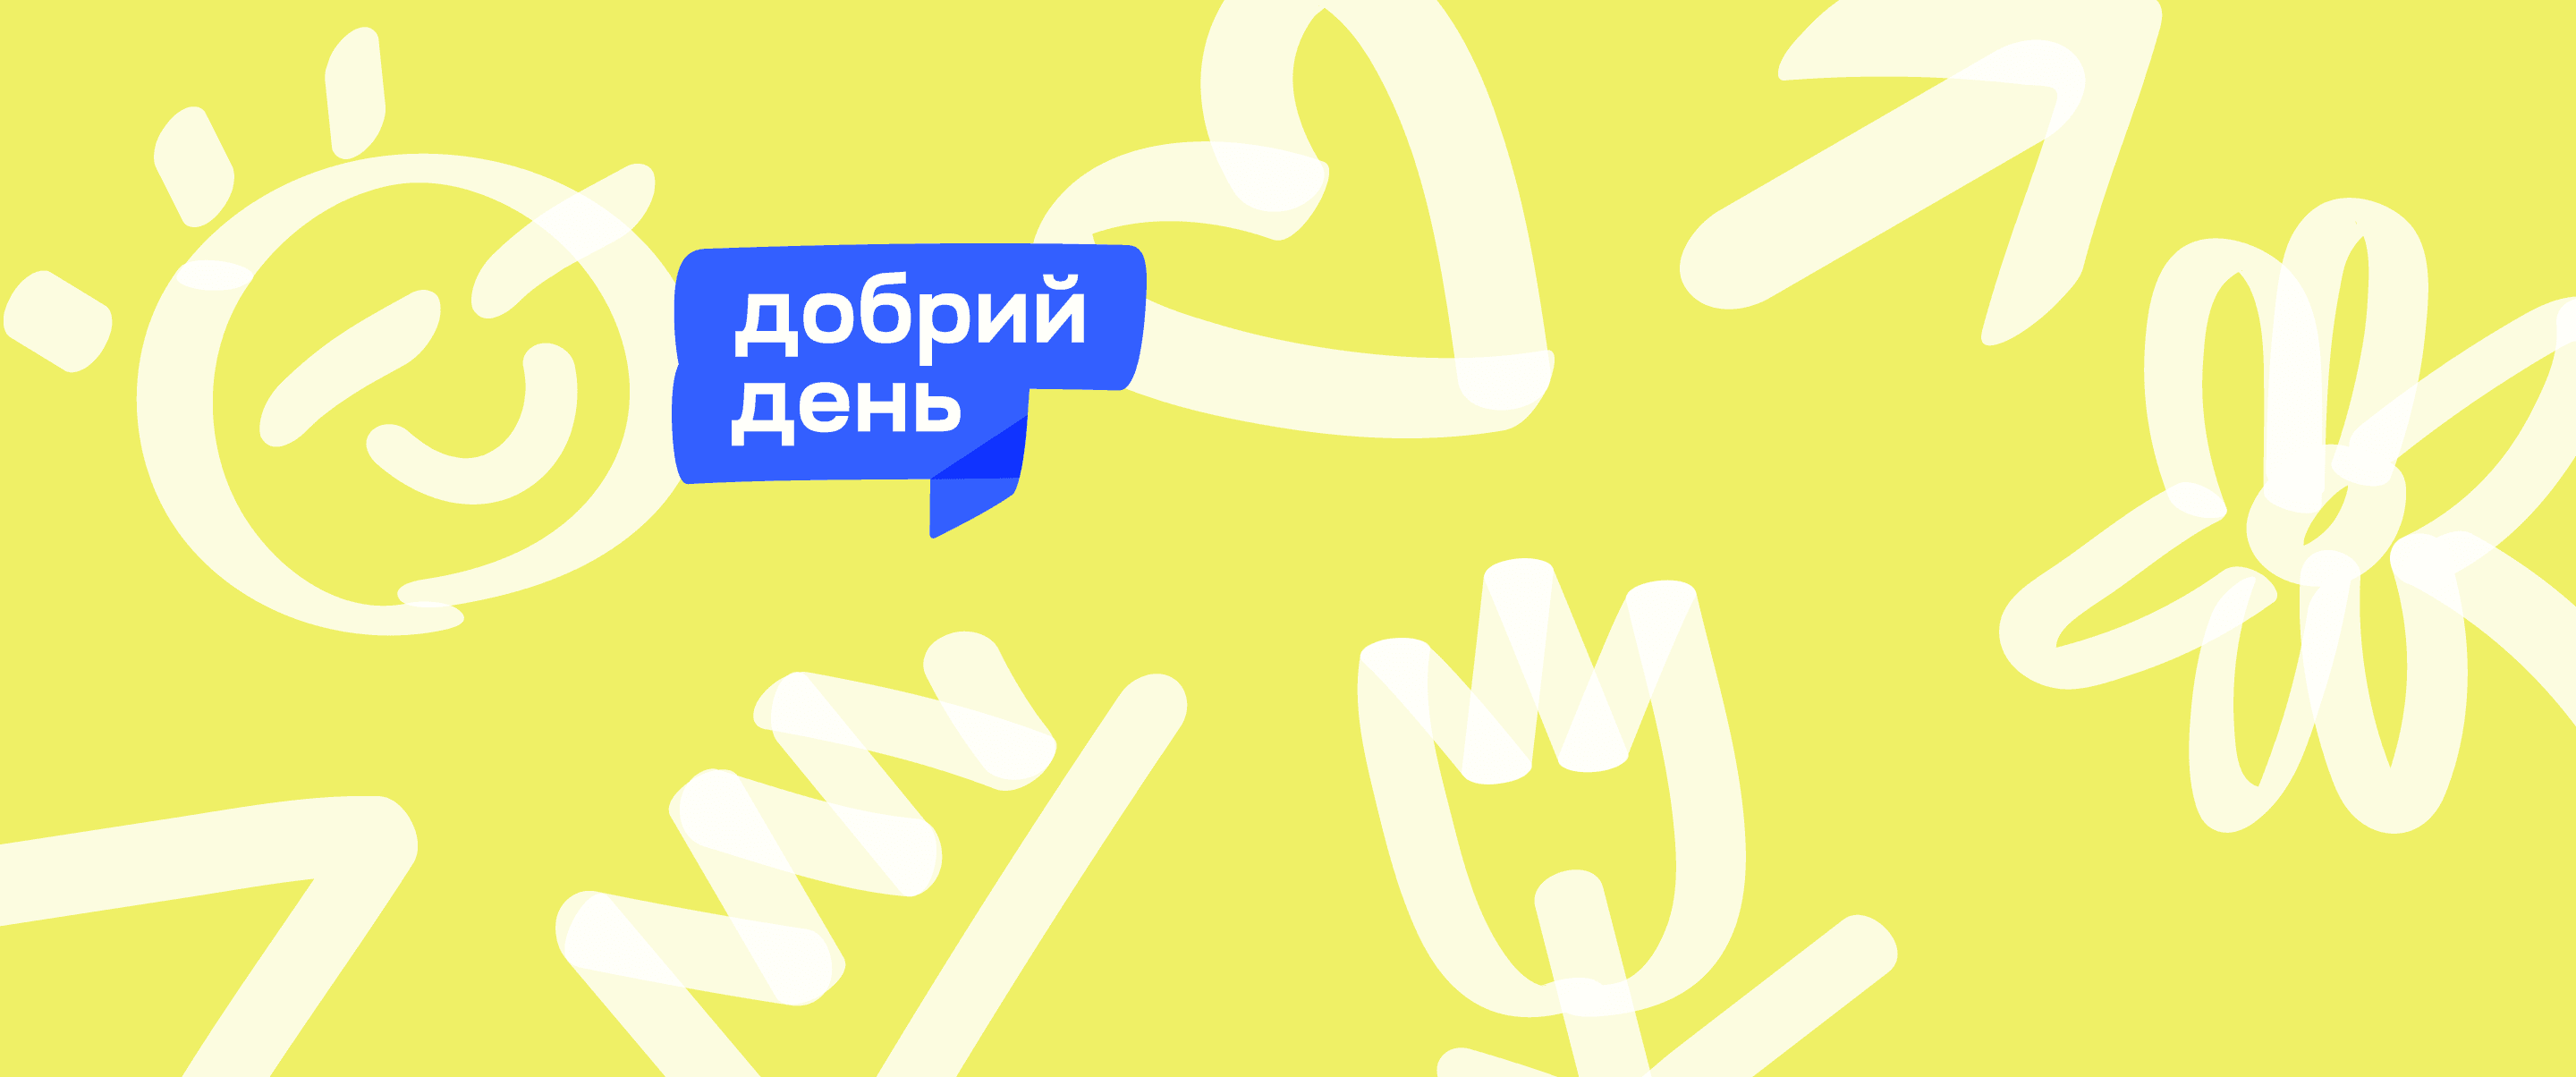 Future for Ukraine Foundation is launching the Good Day initiative